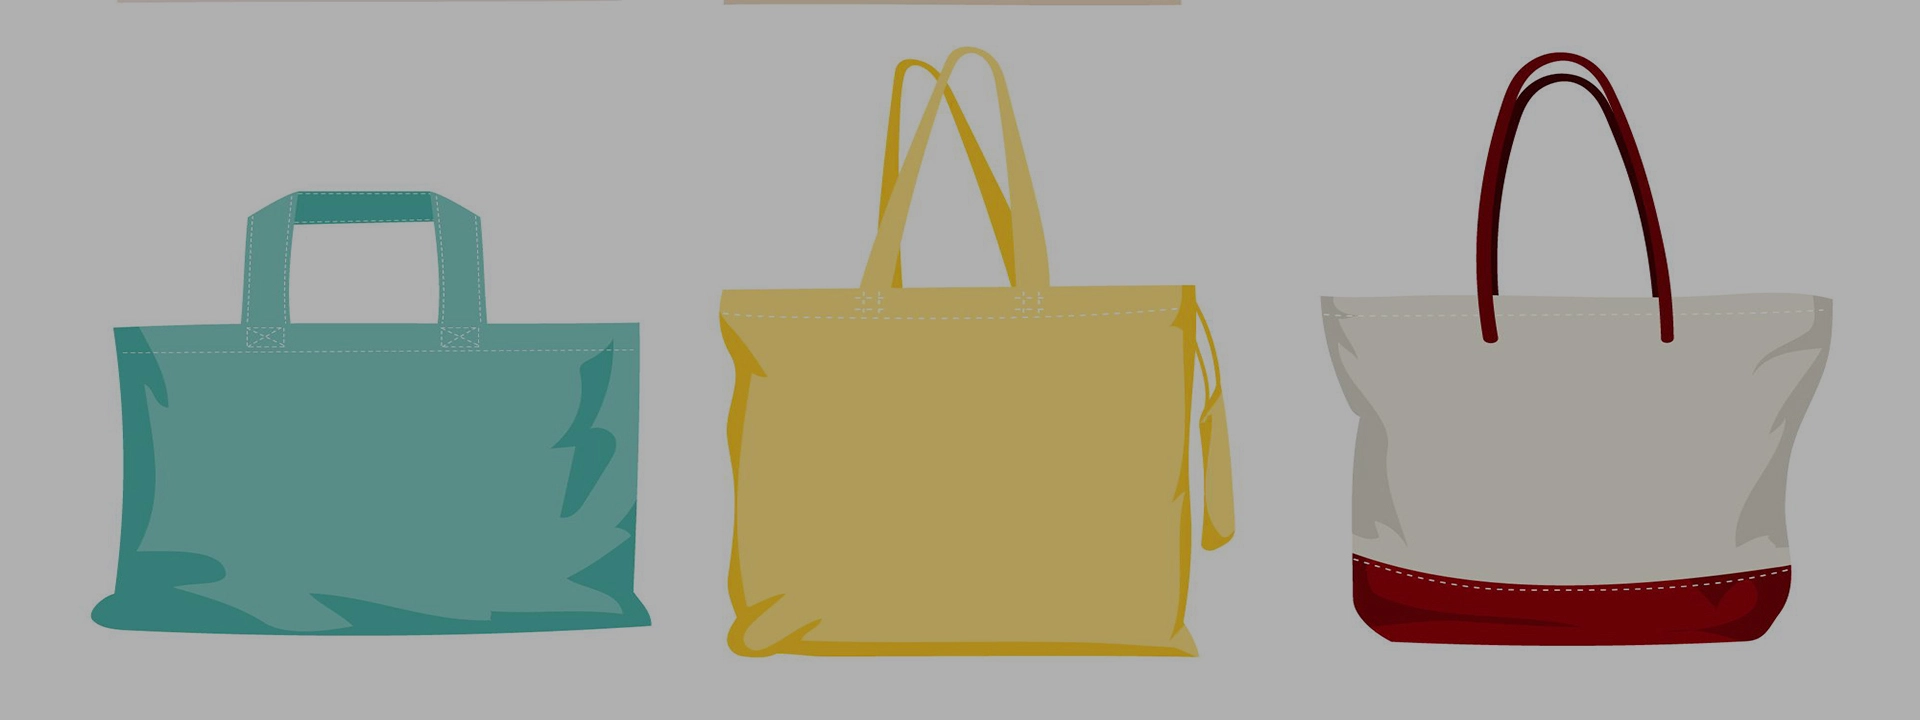 Consumer Experiences with Non-woven Fabric Tote Bags